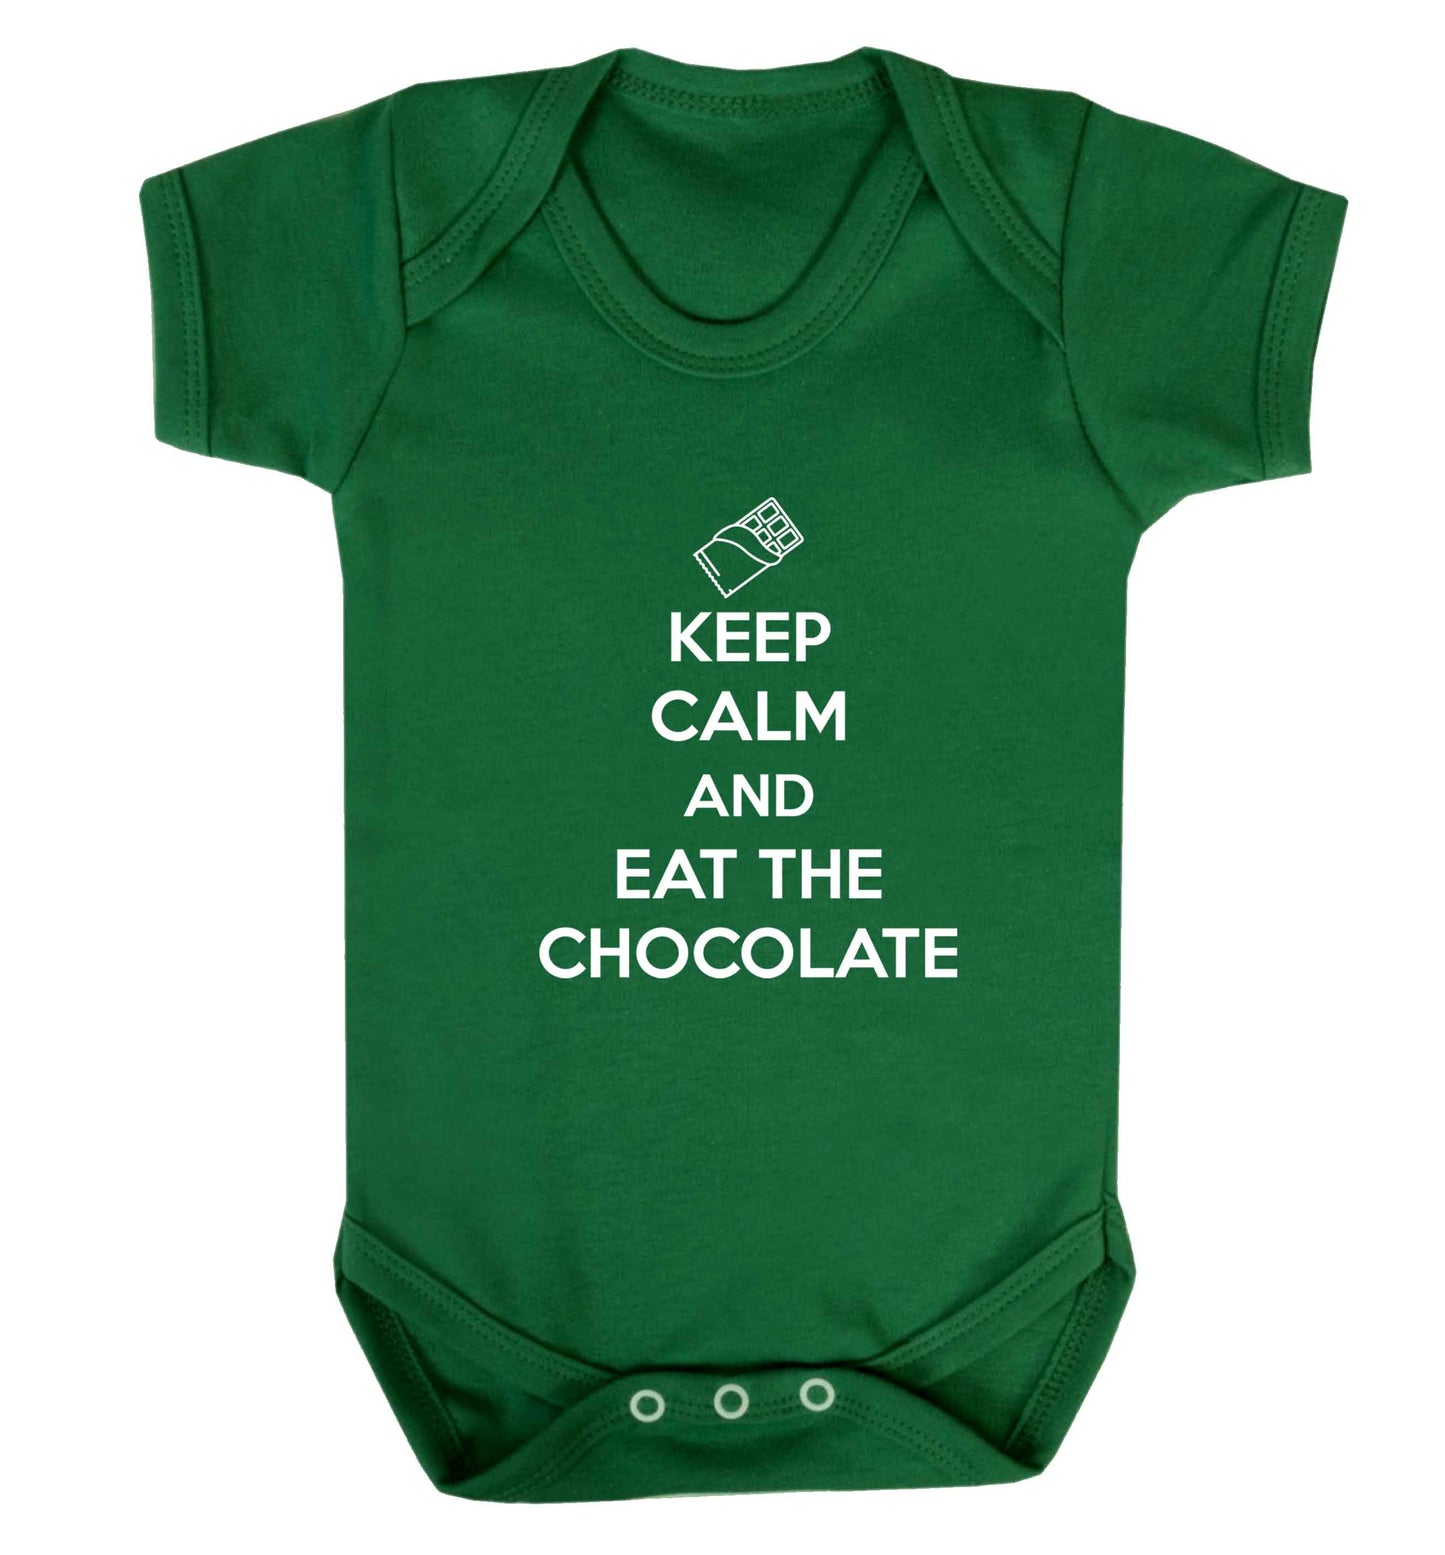 funny gift for a chocaholic! Keep calm and eat the chocolate baby vest green 18-24 months